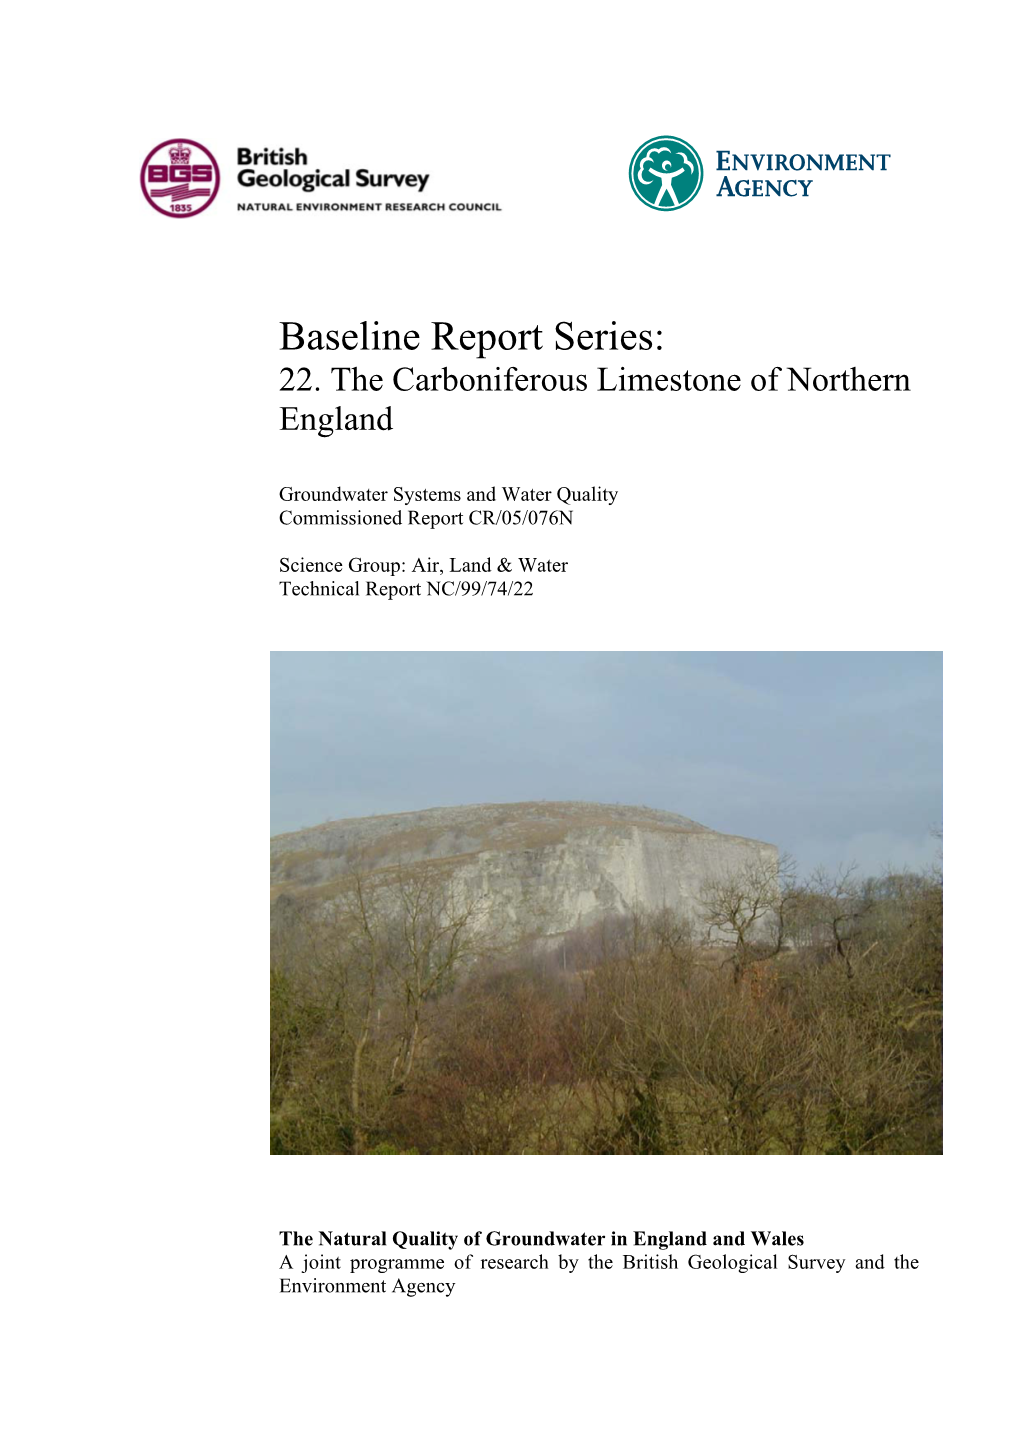 Baseline Report Series: 22. the Carboniferous Limestone of Northern England